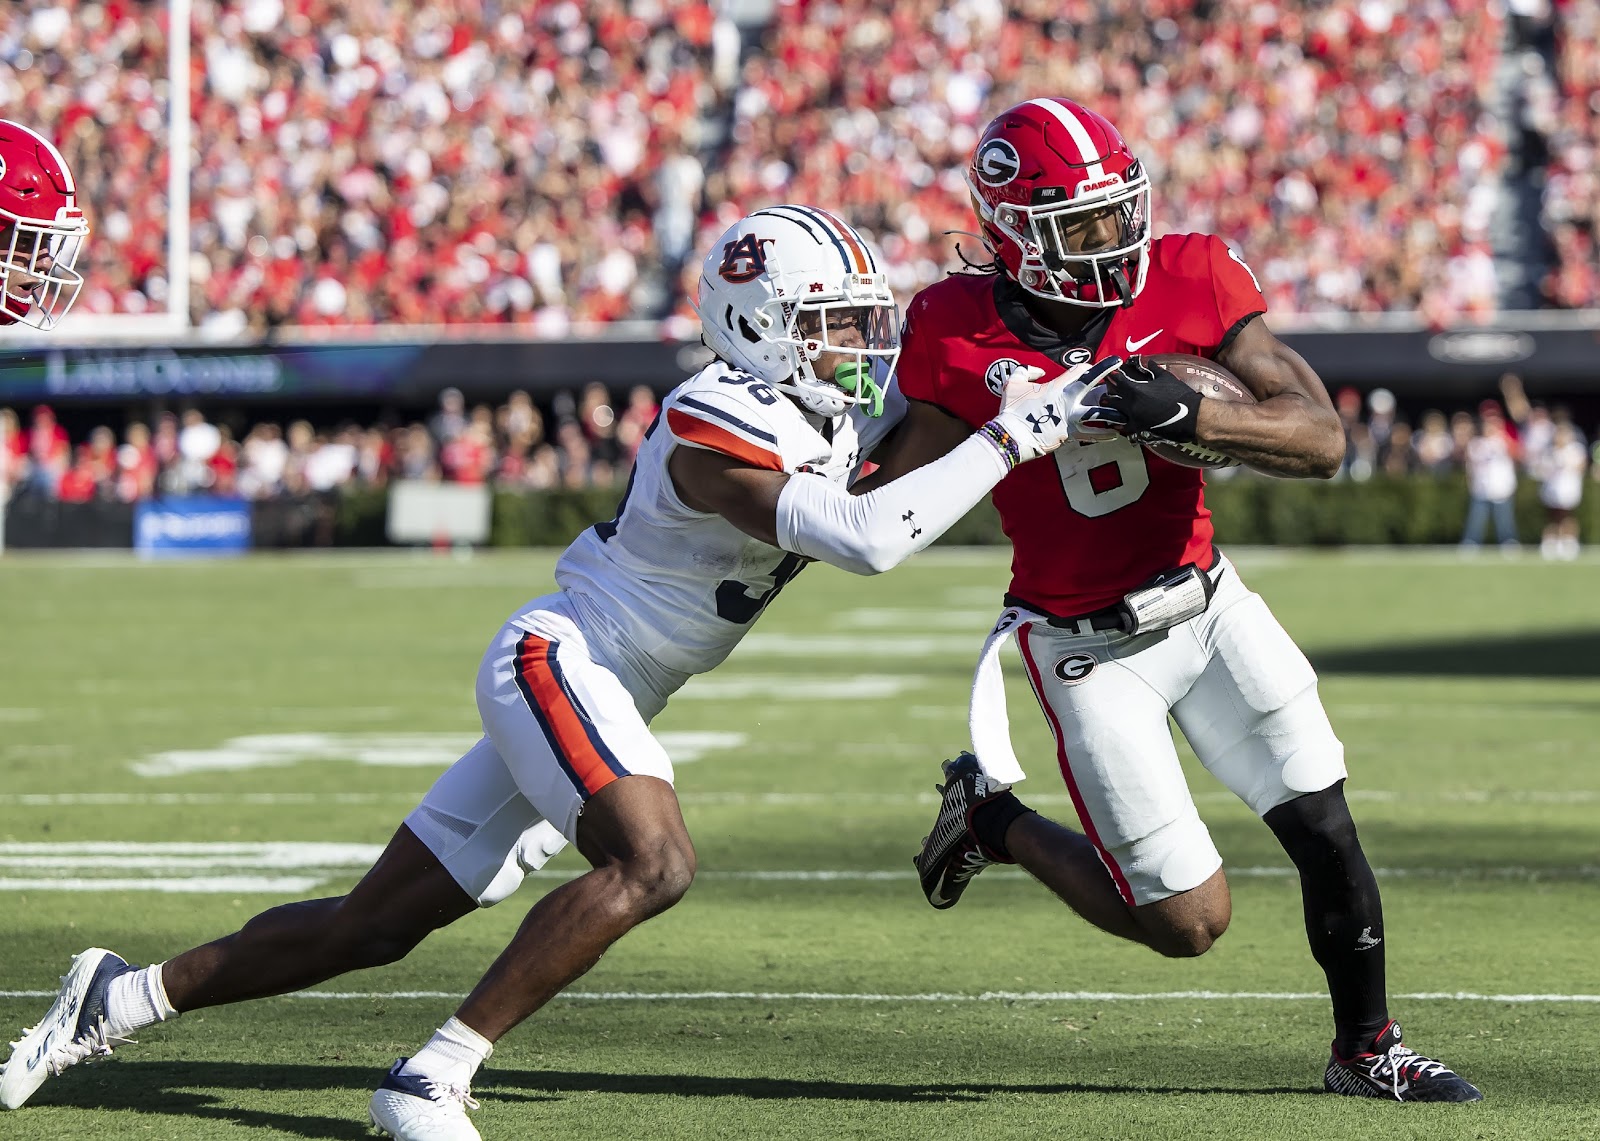 Kenny McIntosh runs towards the end zone during a game between Auburn Tigers and Georgia Bulldogs.